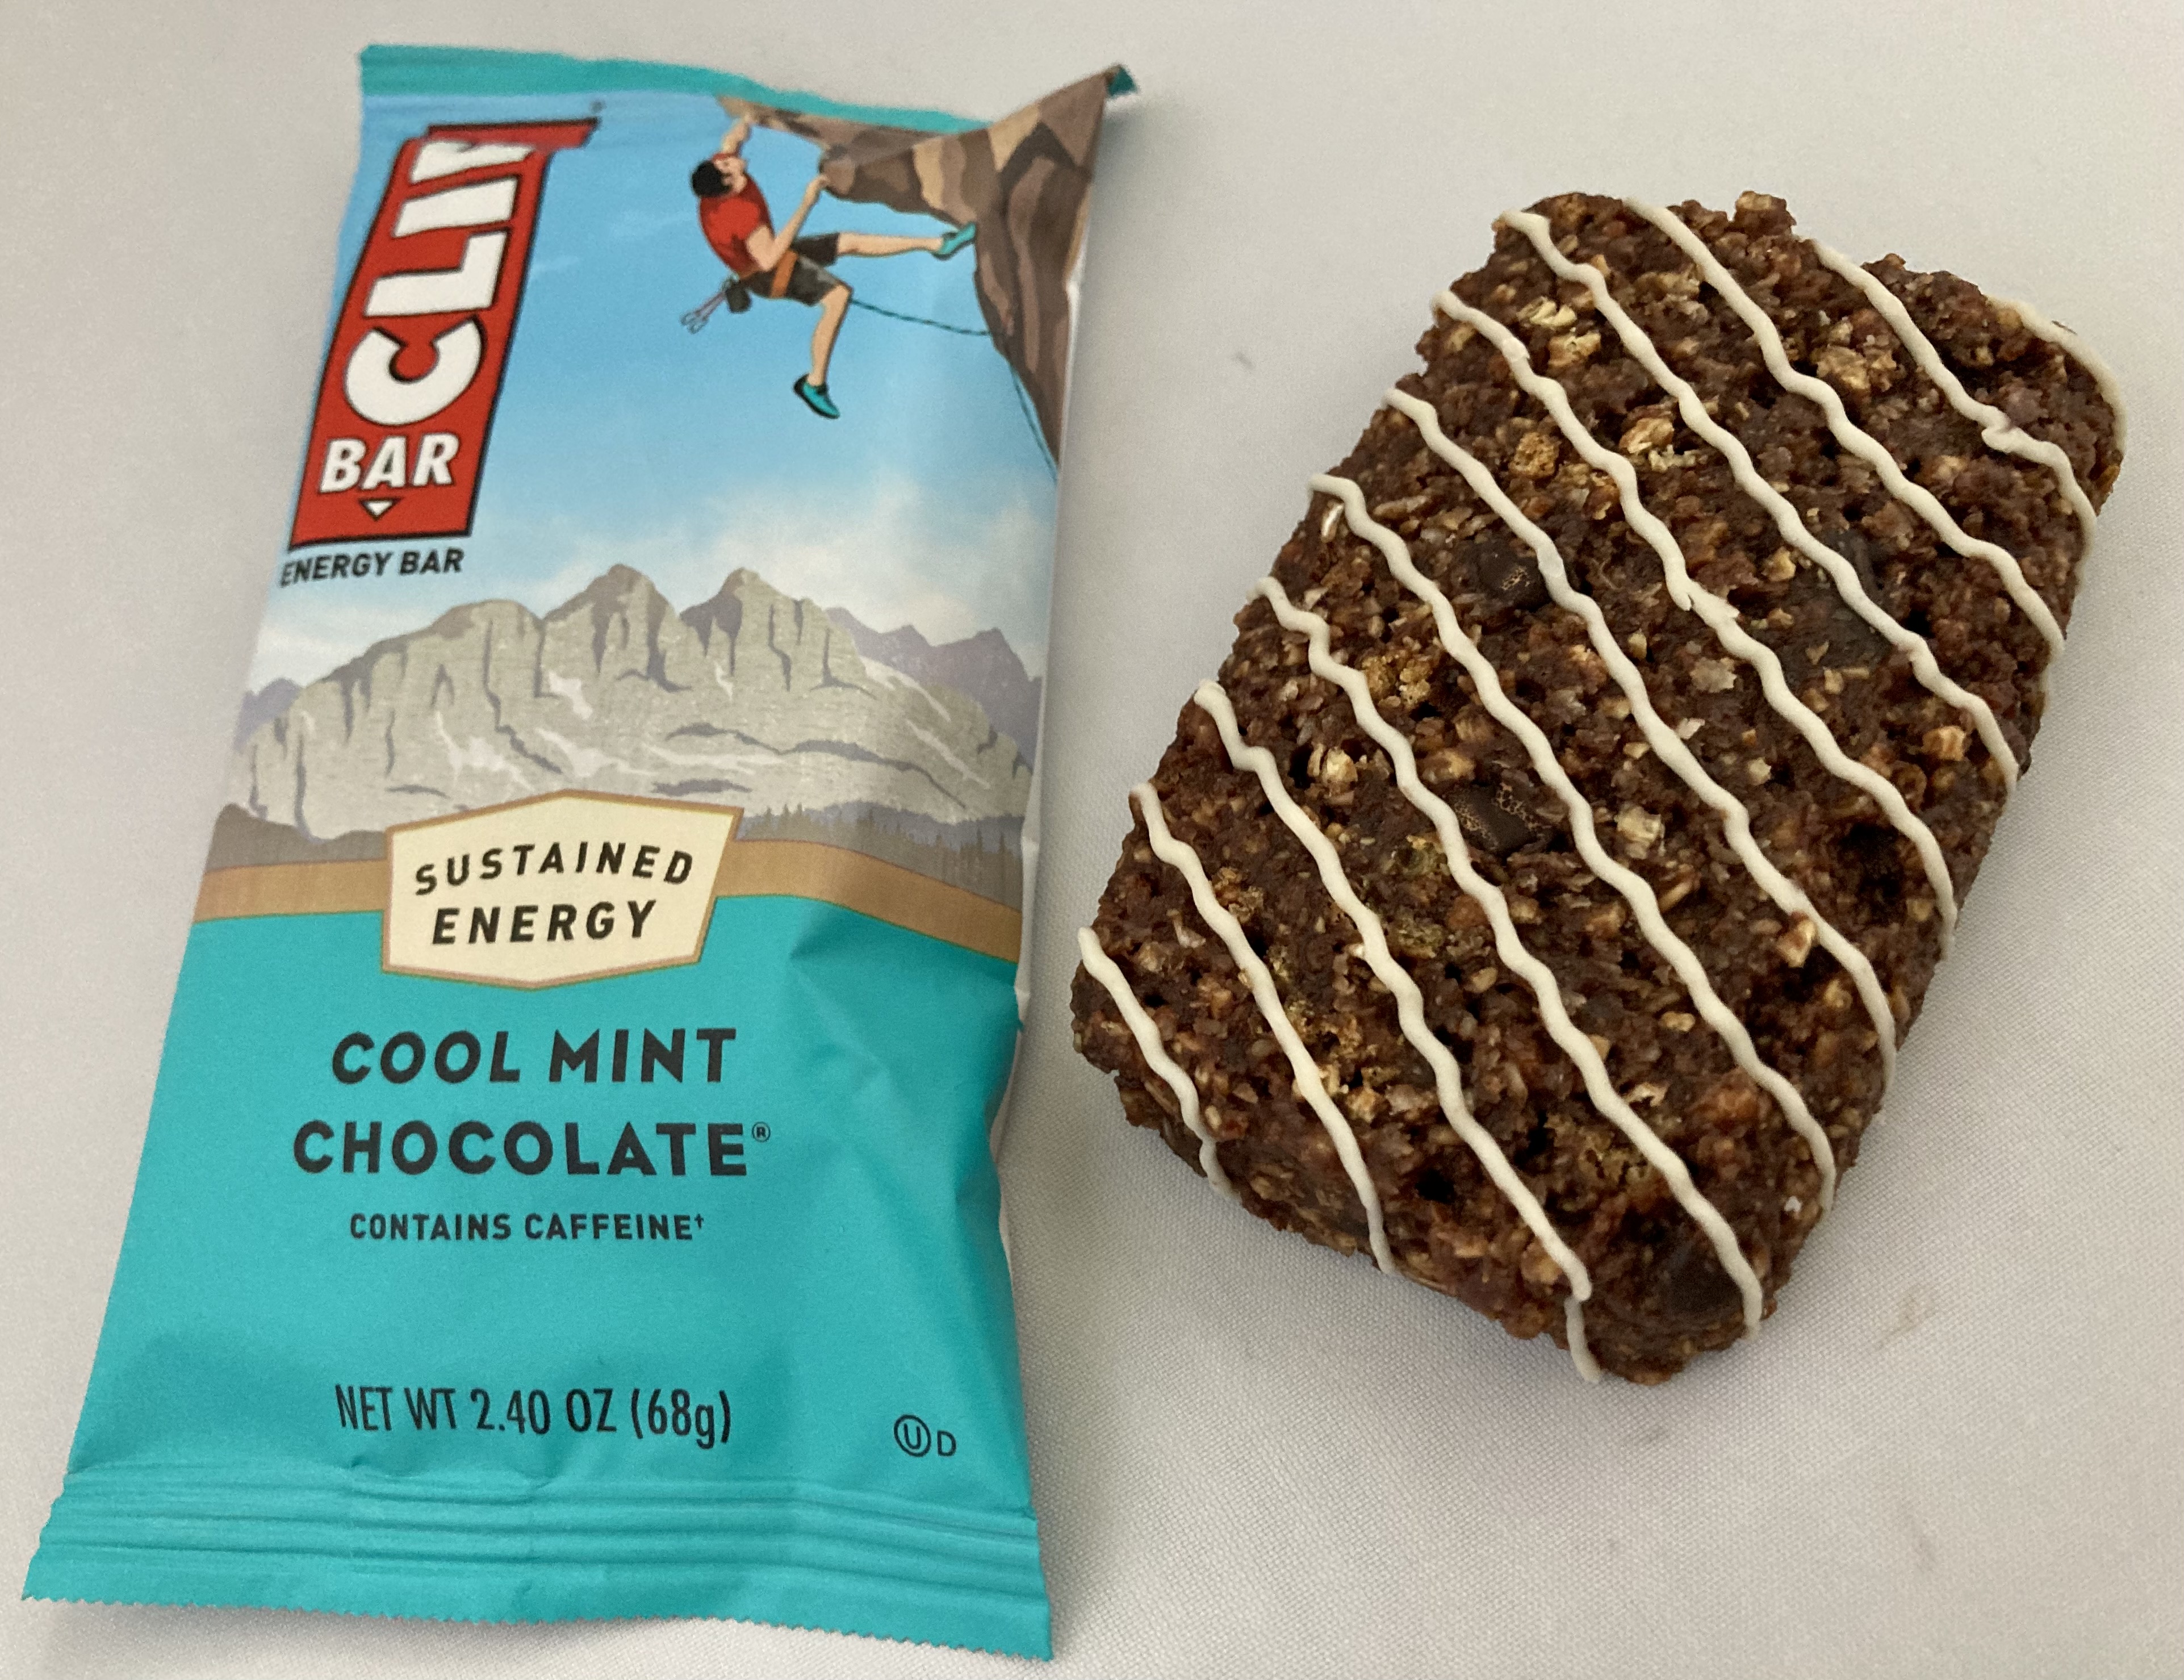 We ate 18 CLIF bars and ranked them worst to best 